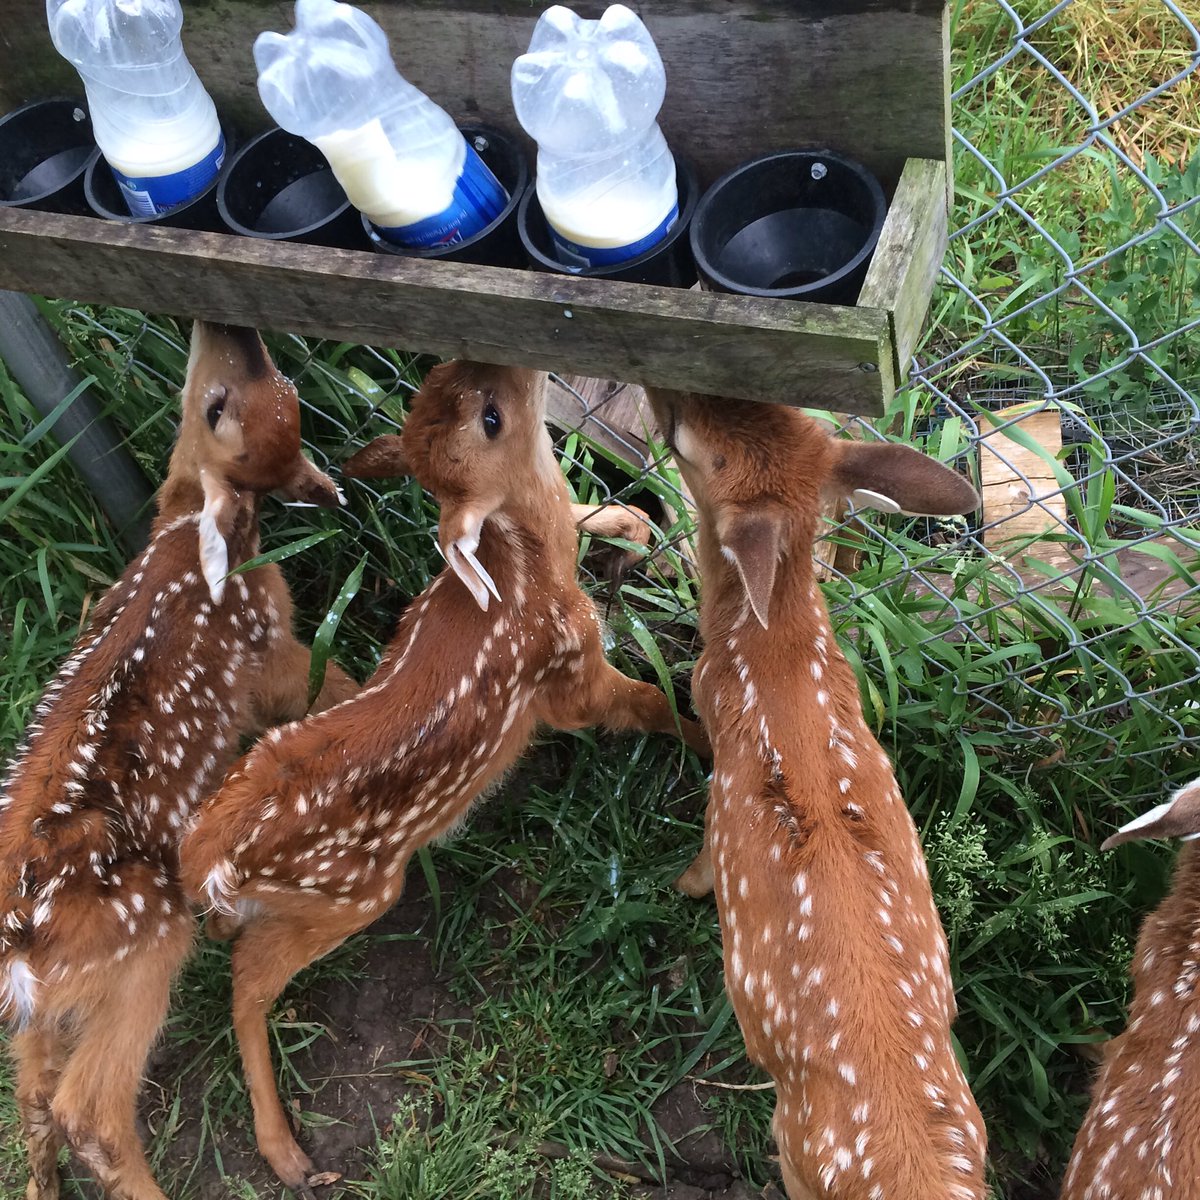 Dairy-bar at @hobbitsteeWR to prevent human habitation we make fawns feed themselves. #wildlifeorphans